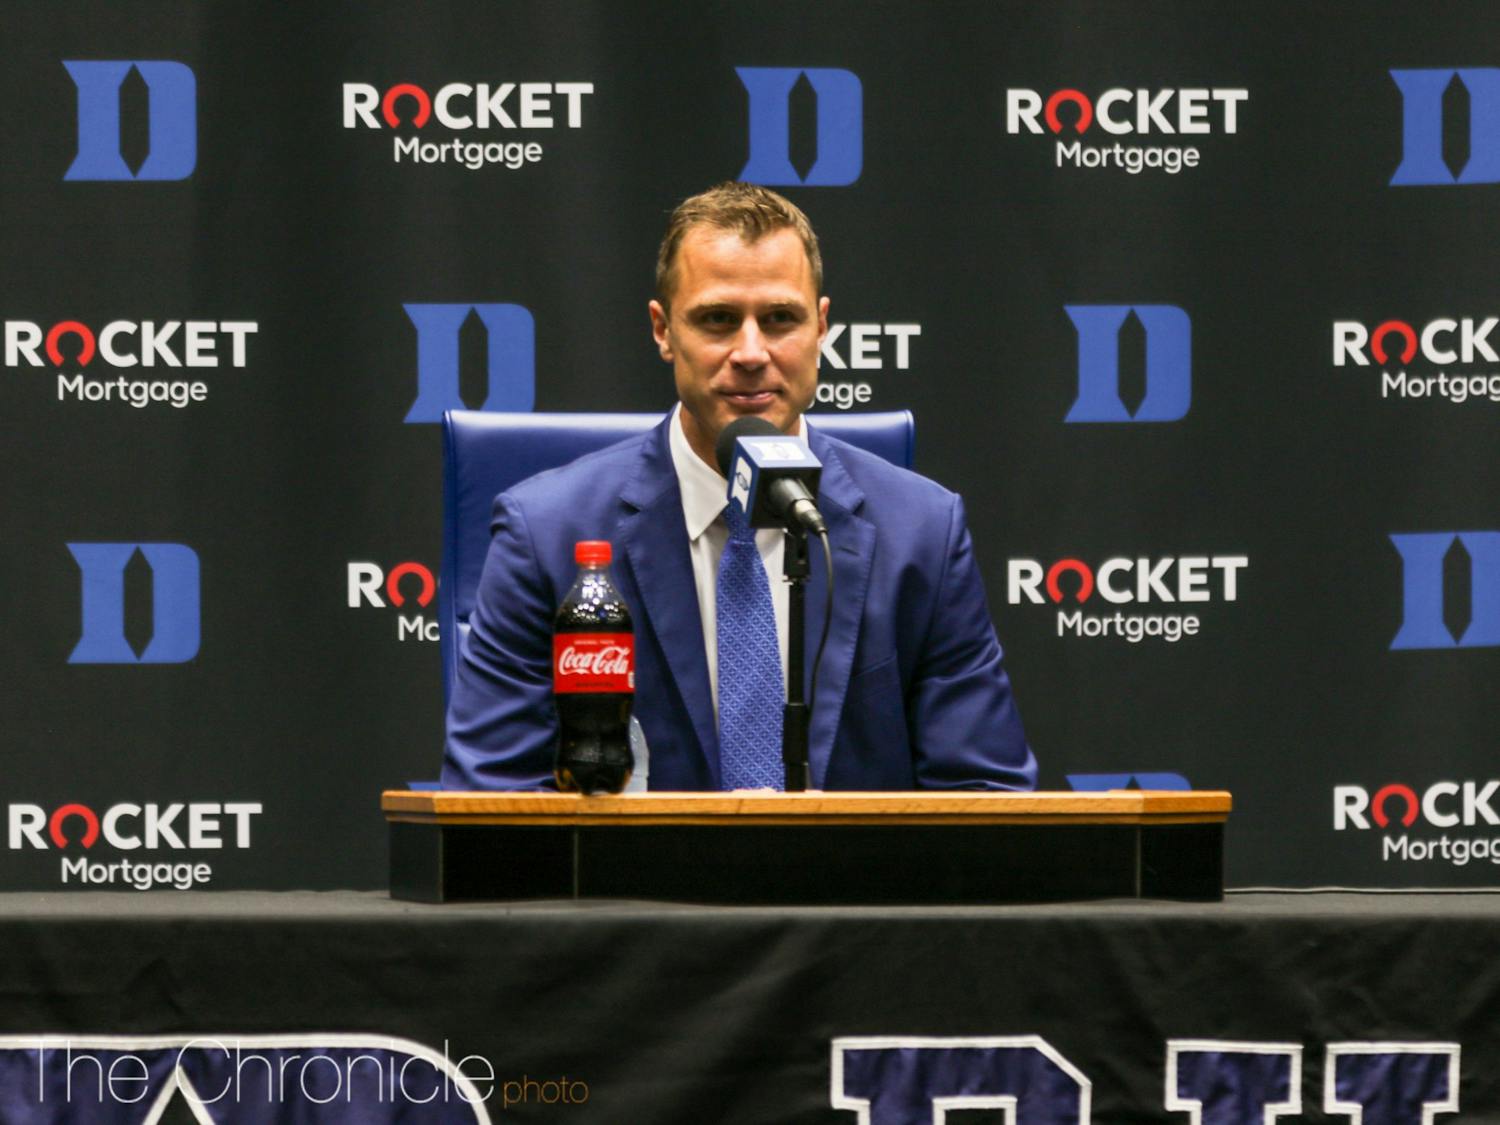 Jon Scheyer's rapid ascent to becoming Duke's head coach has the program abuzz with his youthful energy.